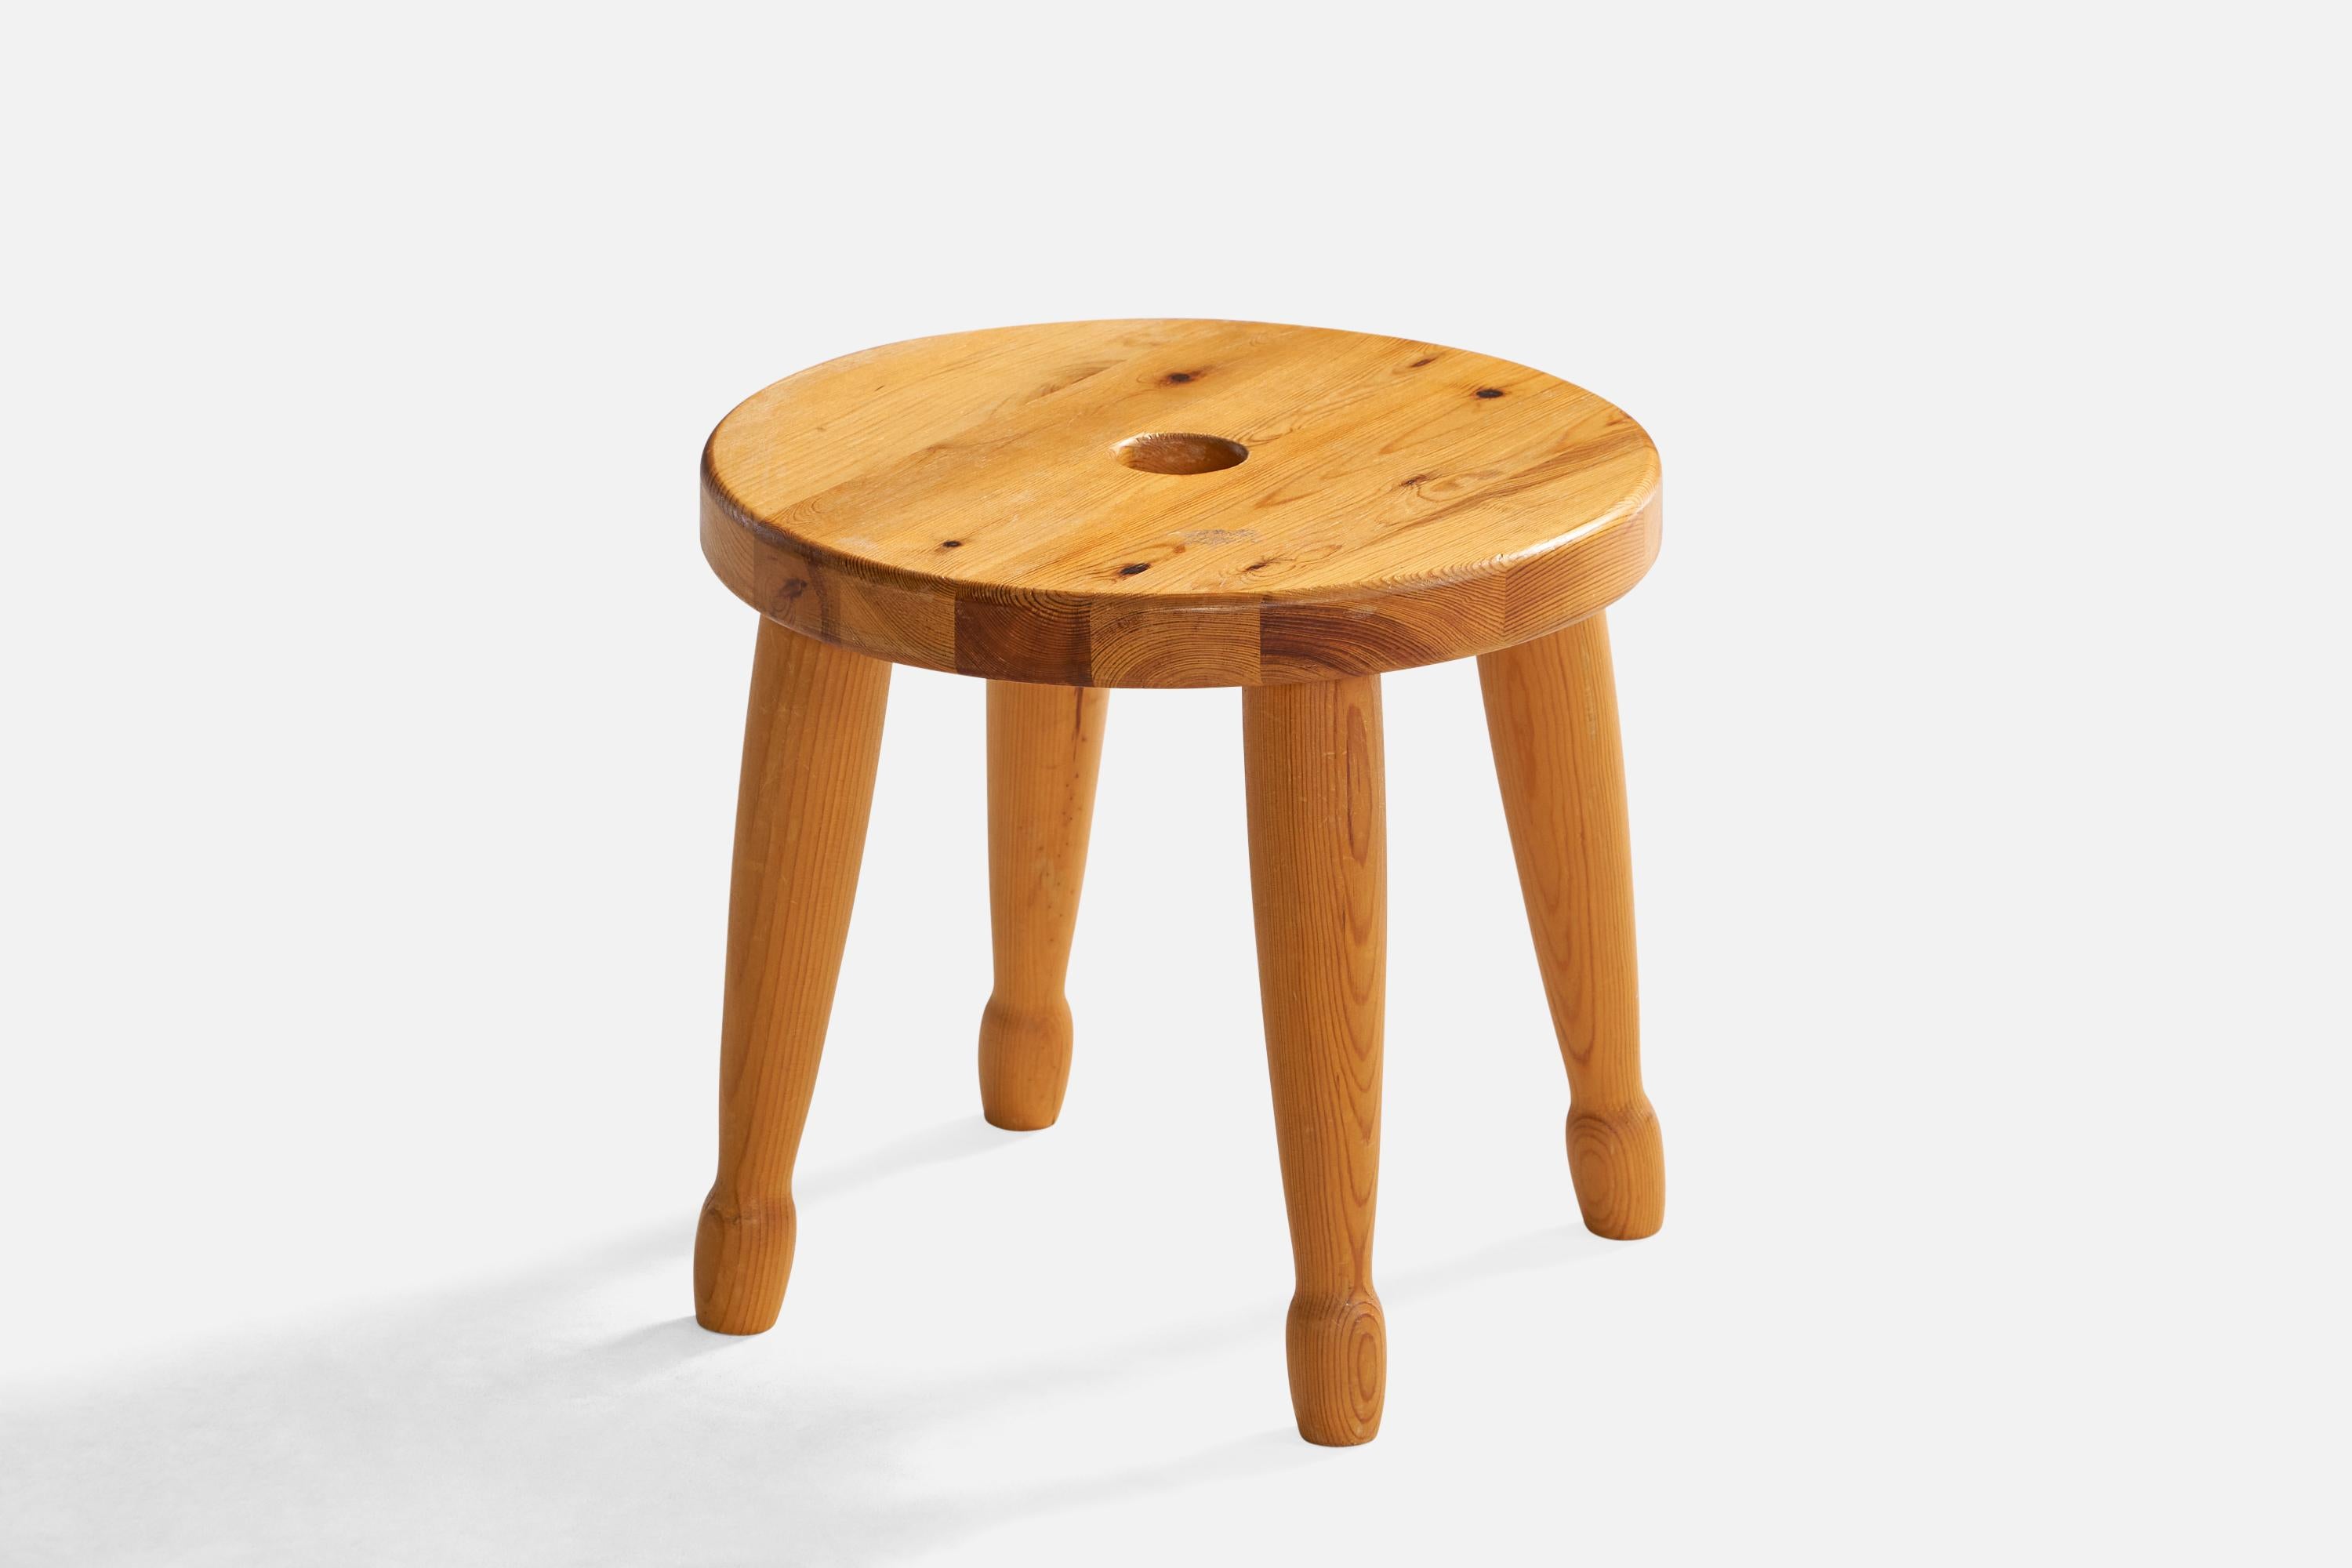 A pine stool designed and produced in Sweden, 1970s.

Seat height: 10.8”
seat diameter: 12”